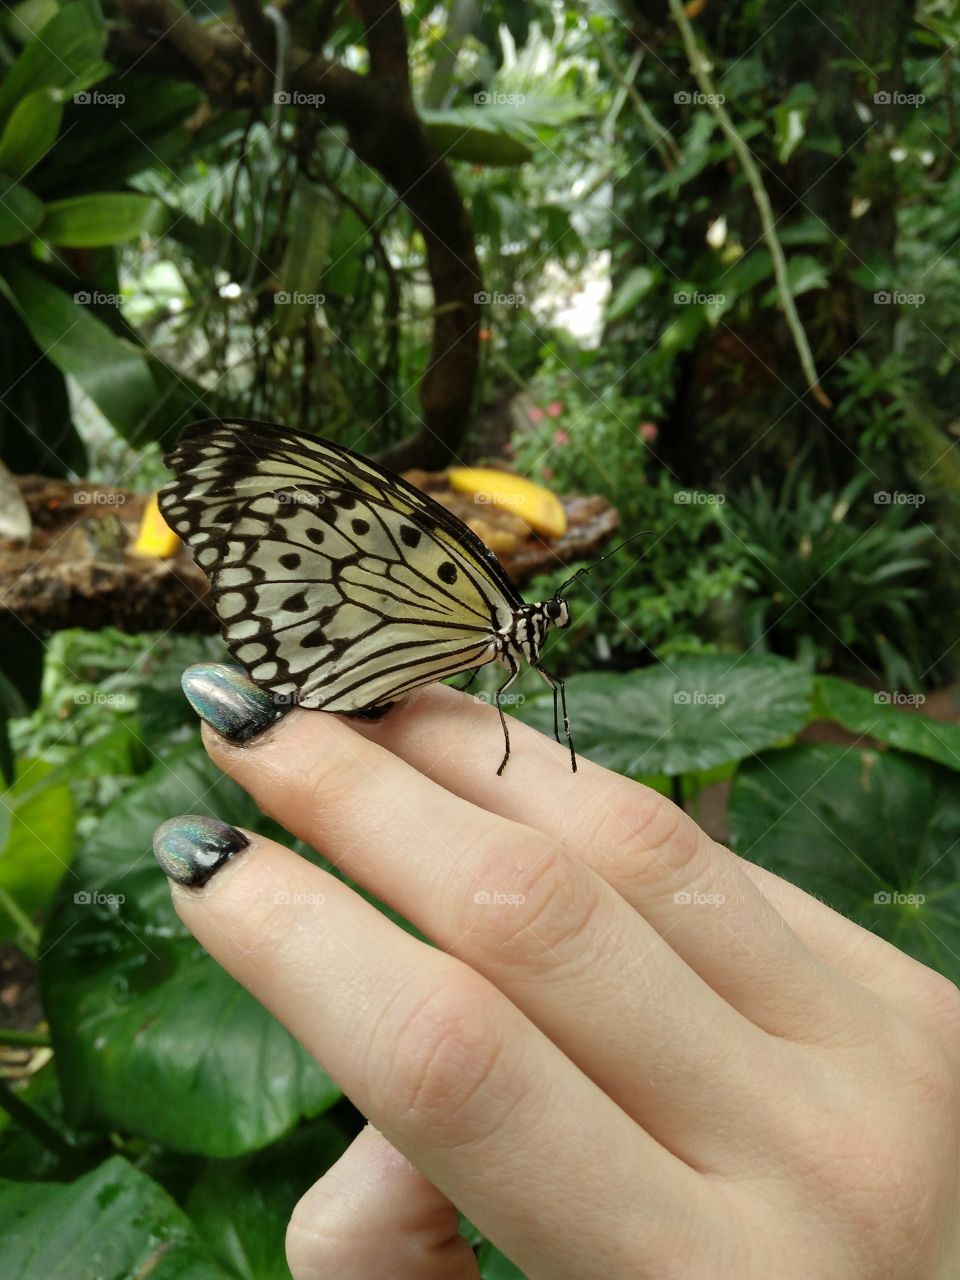 The butterfly exhibit in Houston, Texas is heaven on Earth for nature lovers.